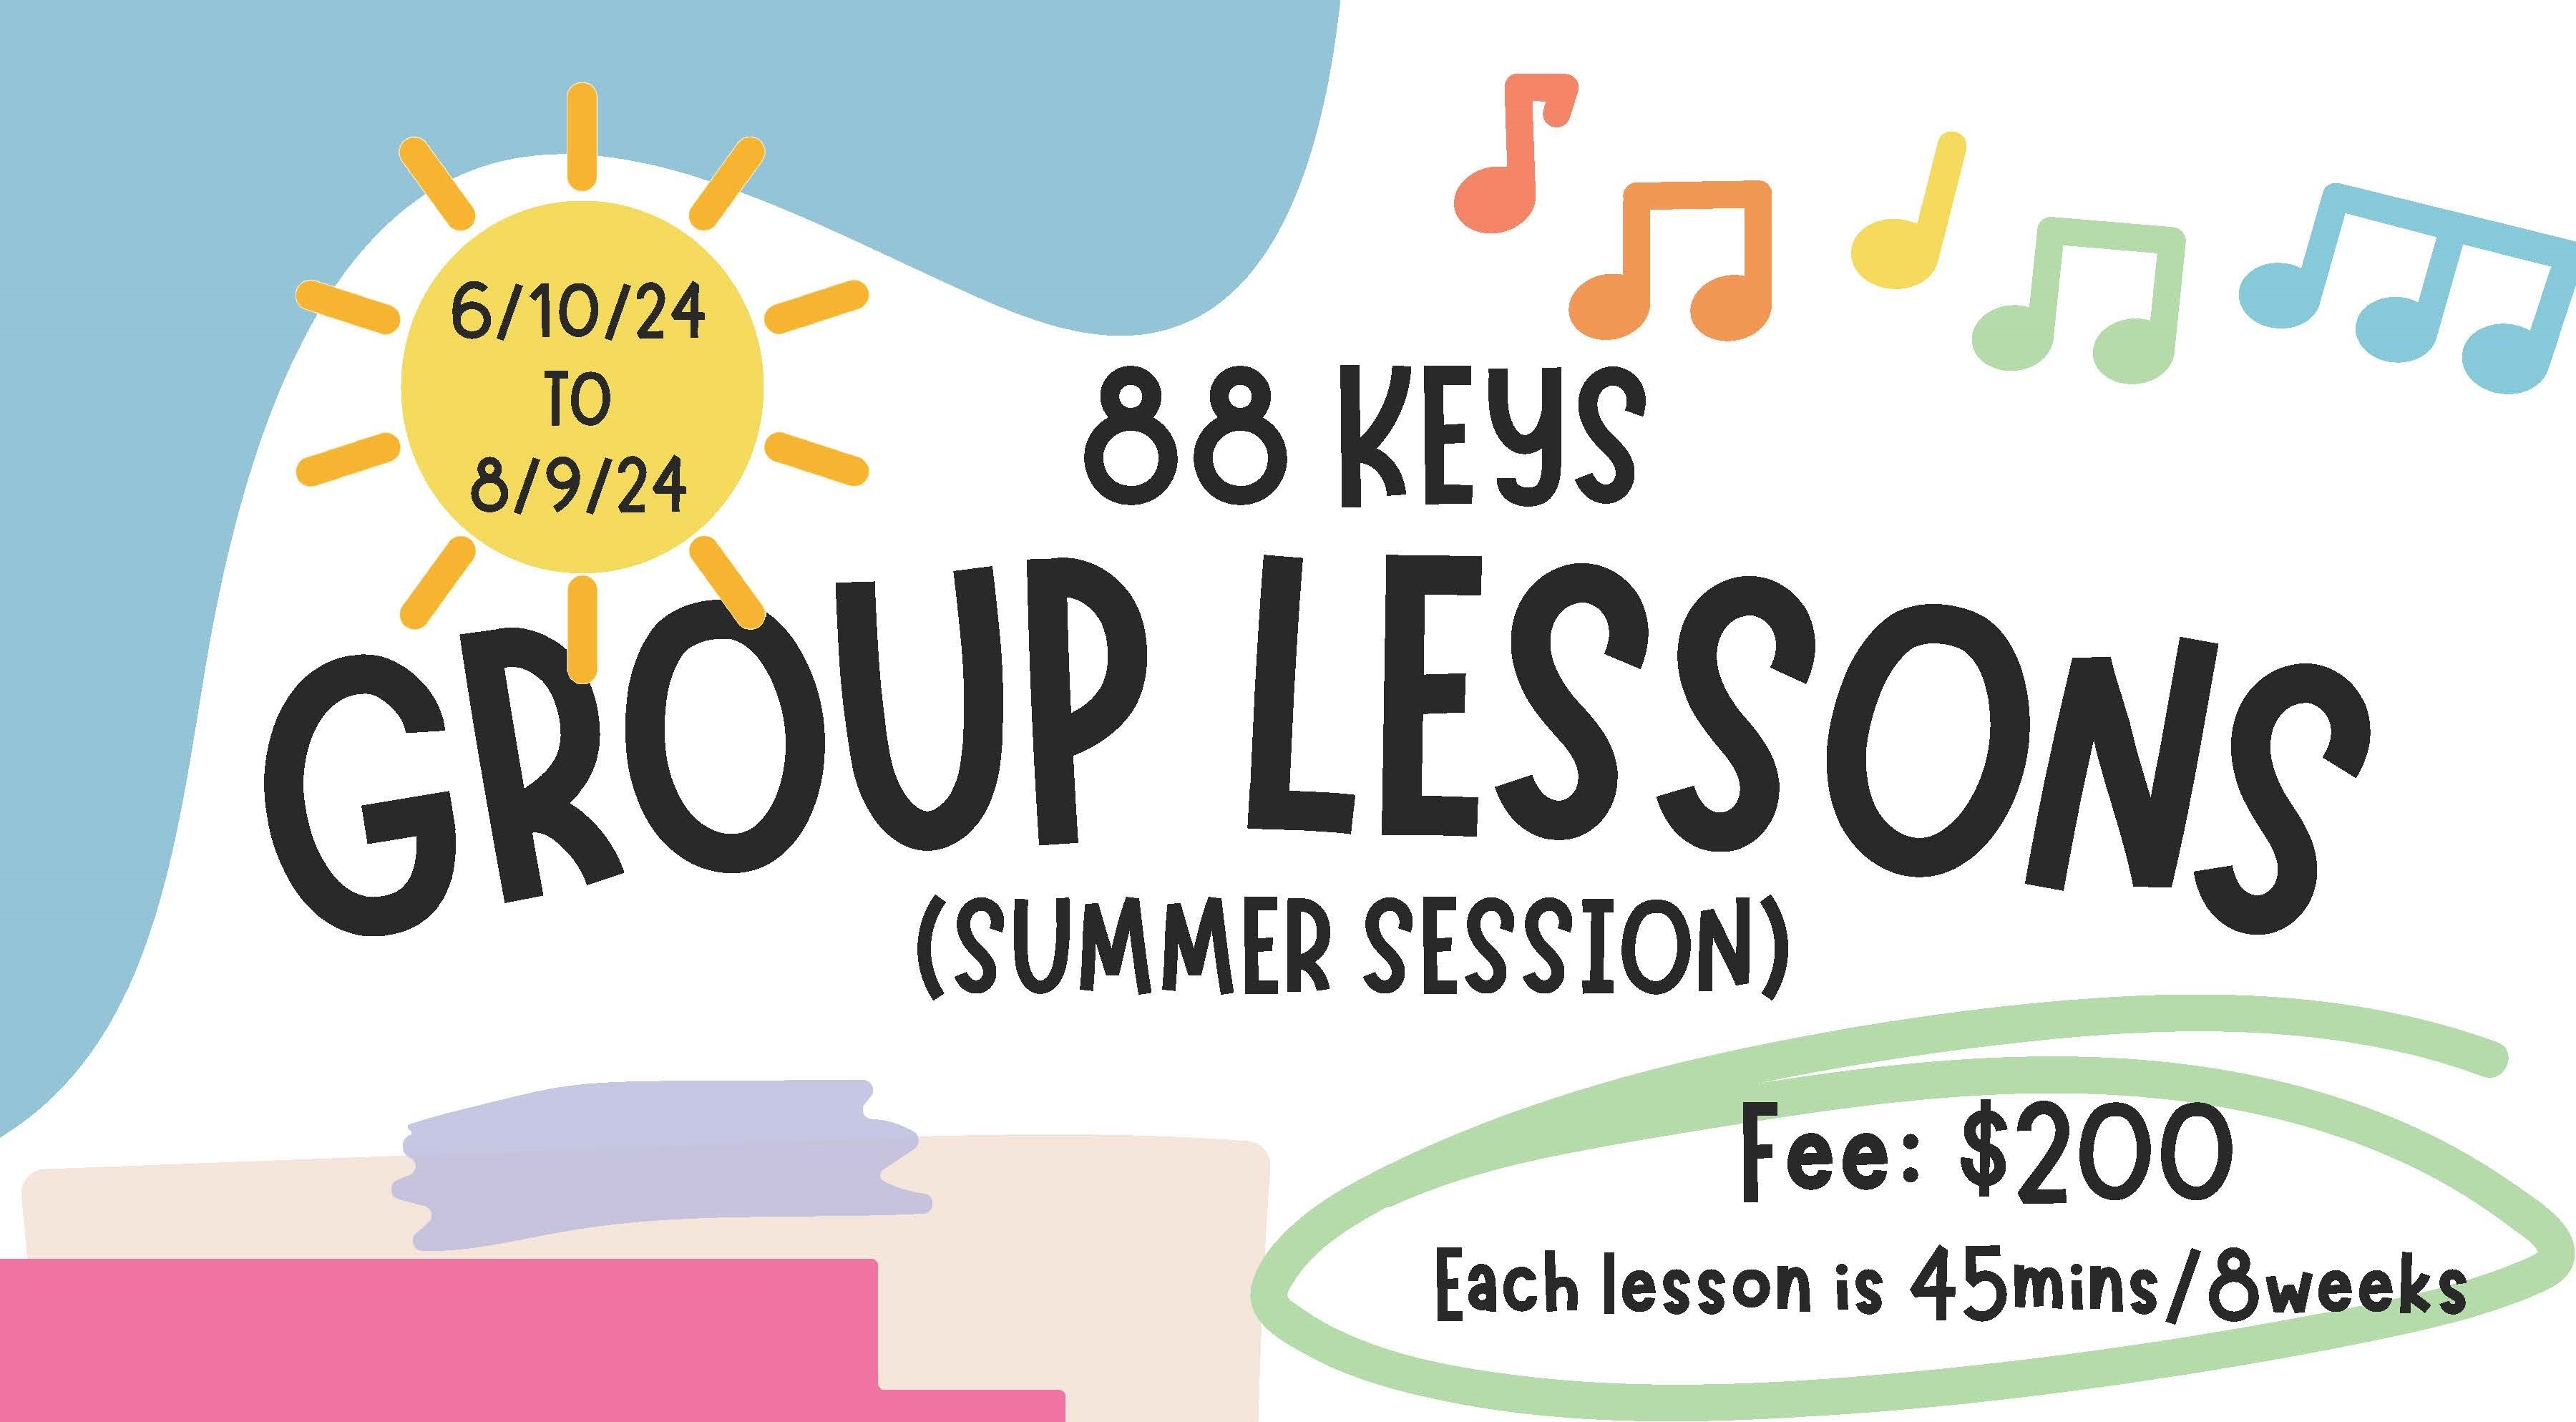 Colorful background with the words 88 Keys - Group lessons - Summer session, and some more information about the summer grou lessons by 88 Keys Music Academy